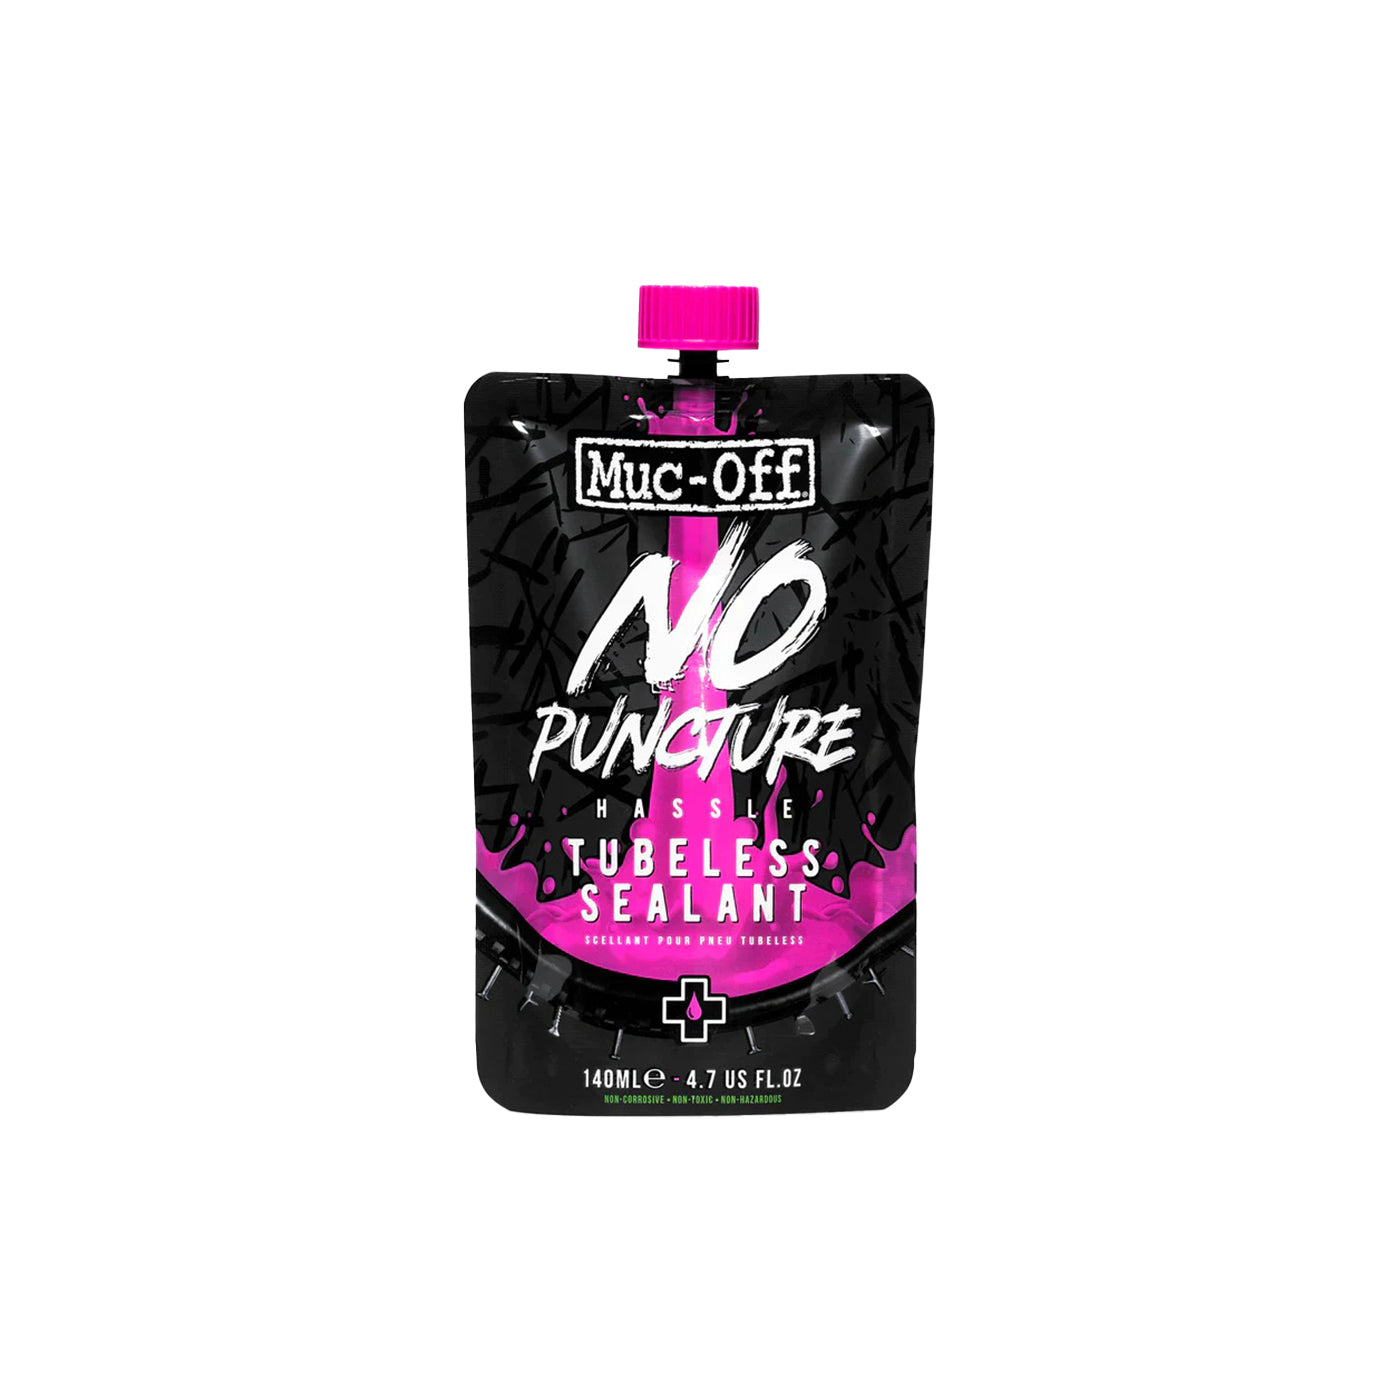 Muc-Off No Puncture Hassle Pouch 140ml